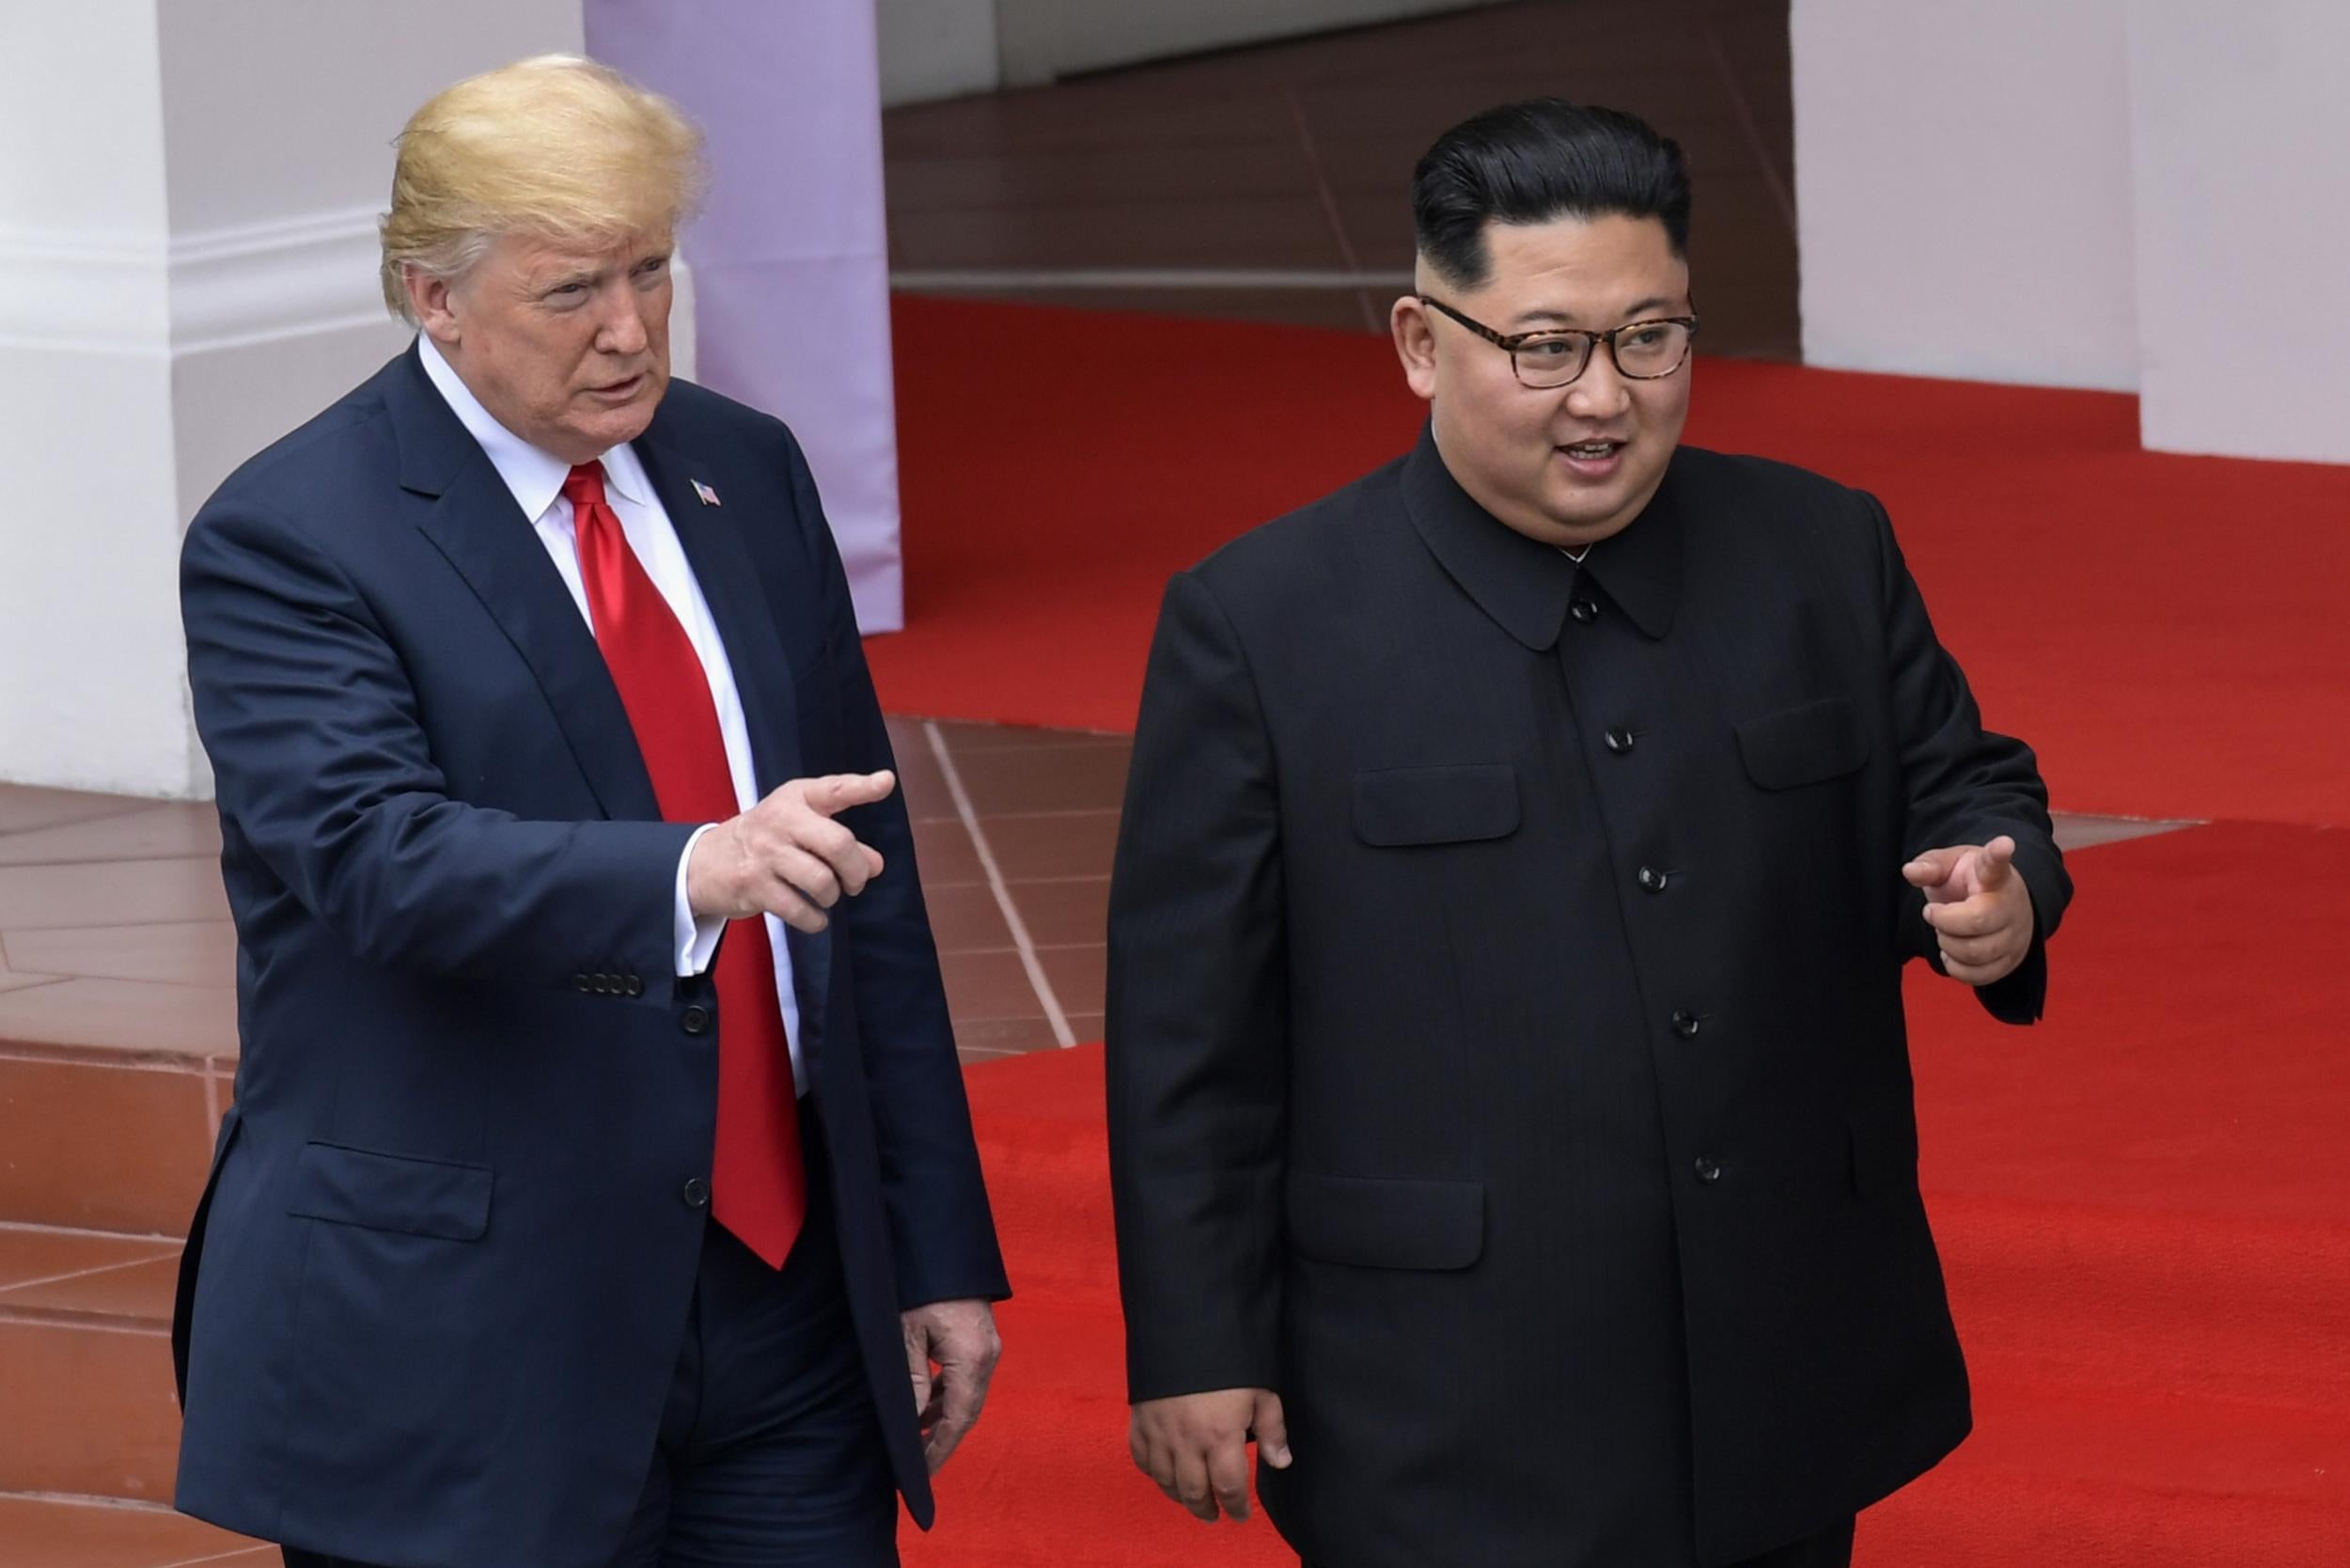 North Korea leader Kim Jong Un has requested a second meeting with US President Donald Trump in a letter, the White House says